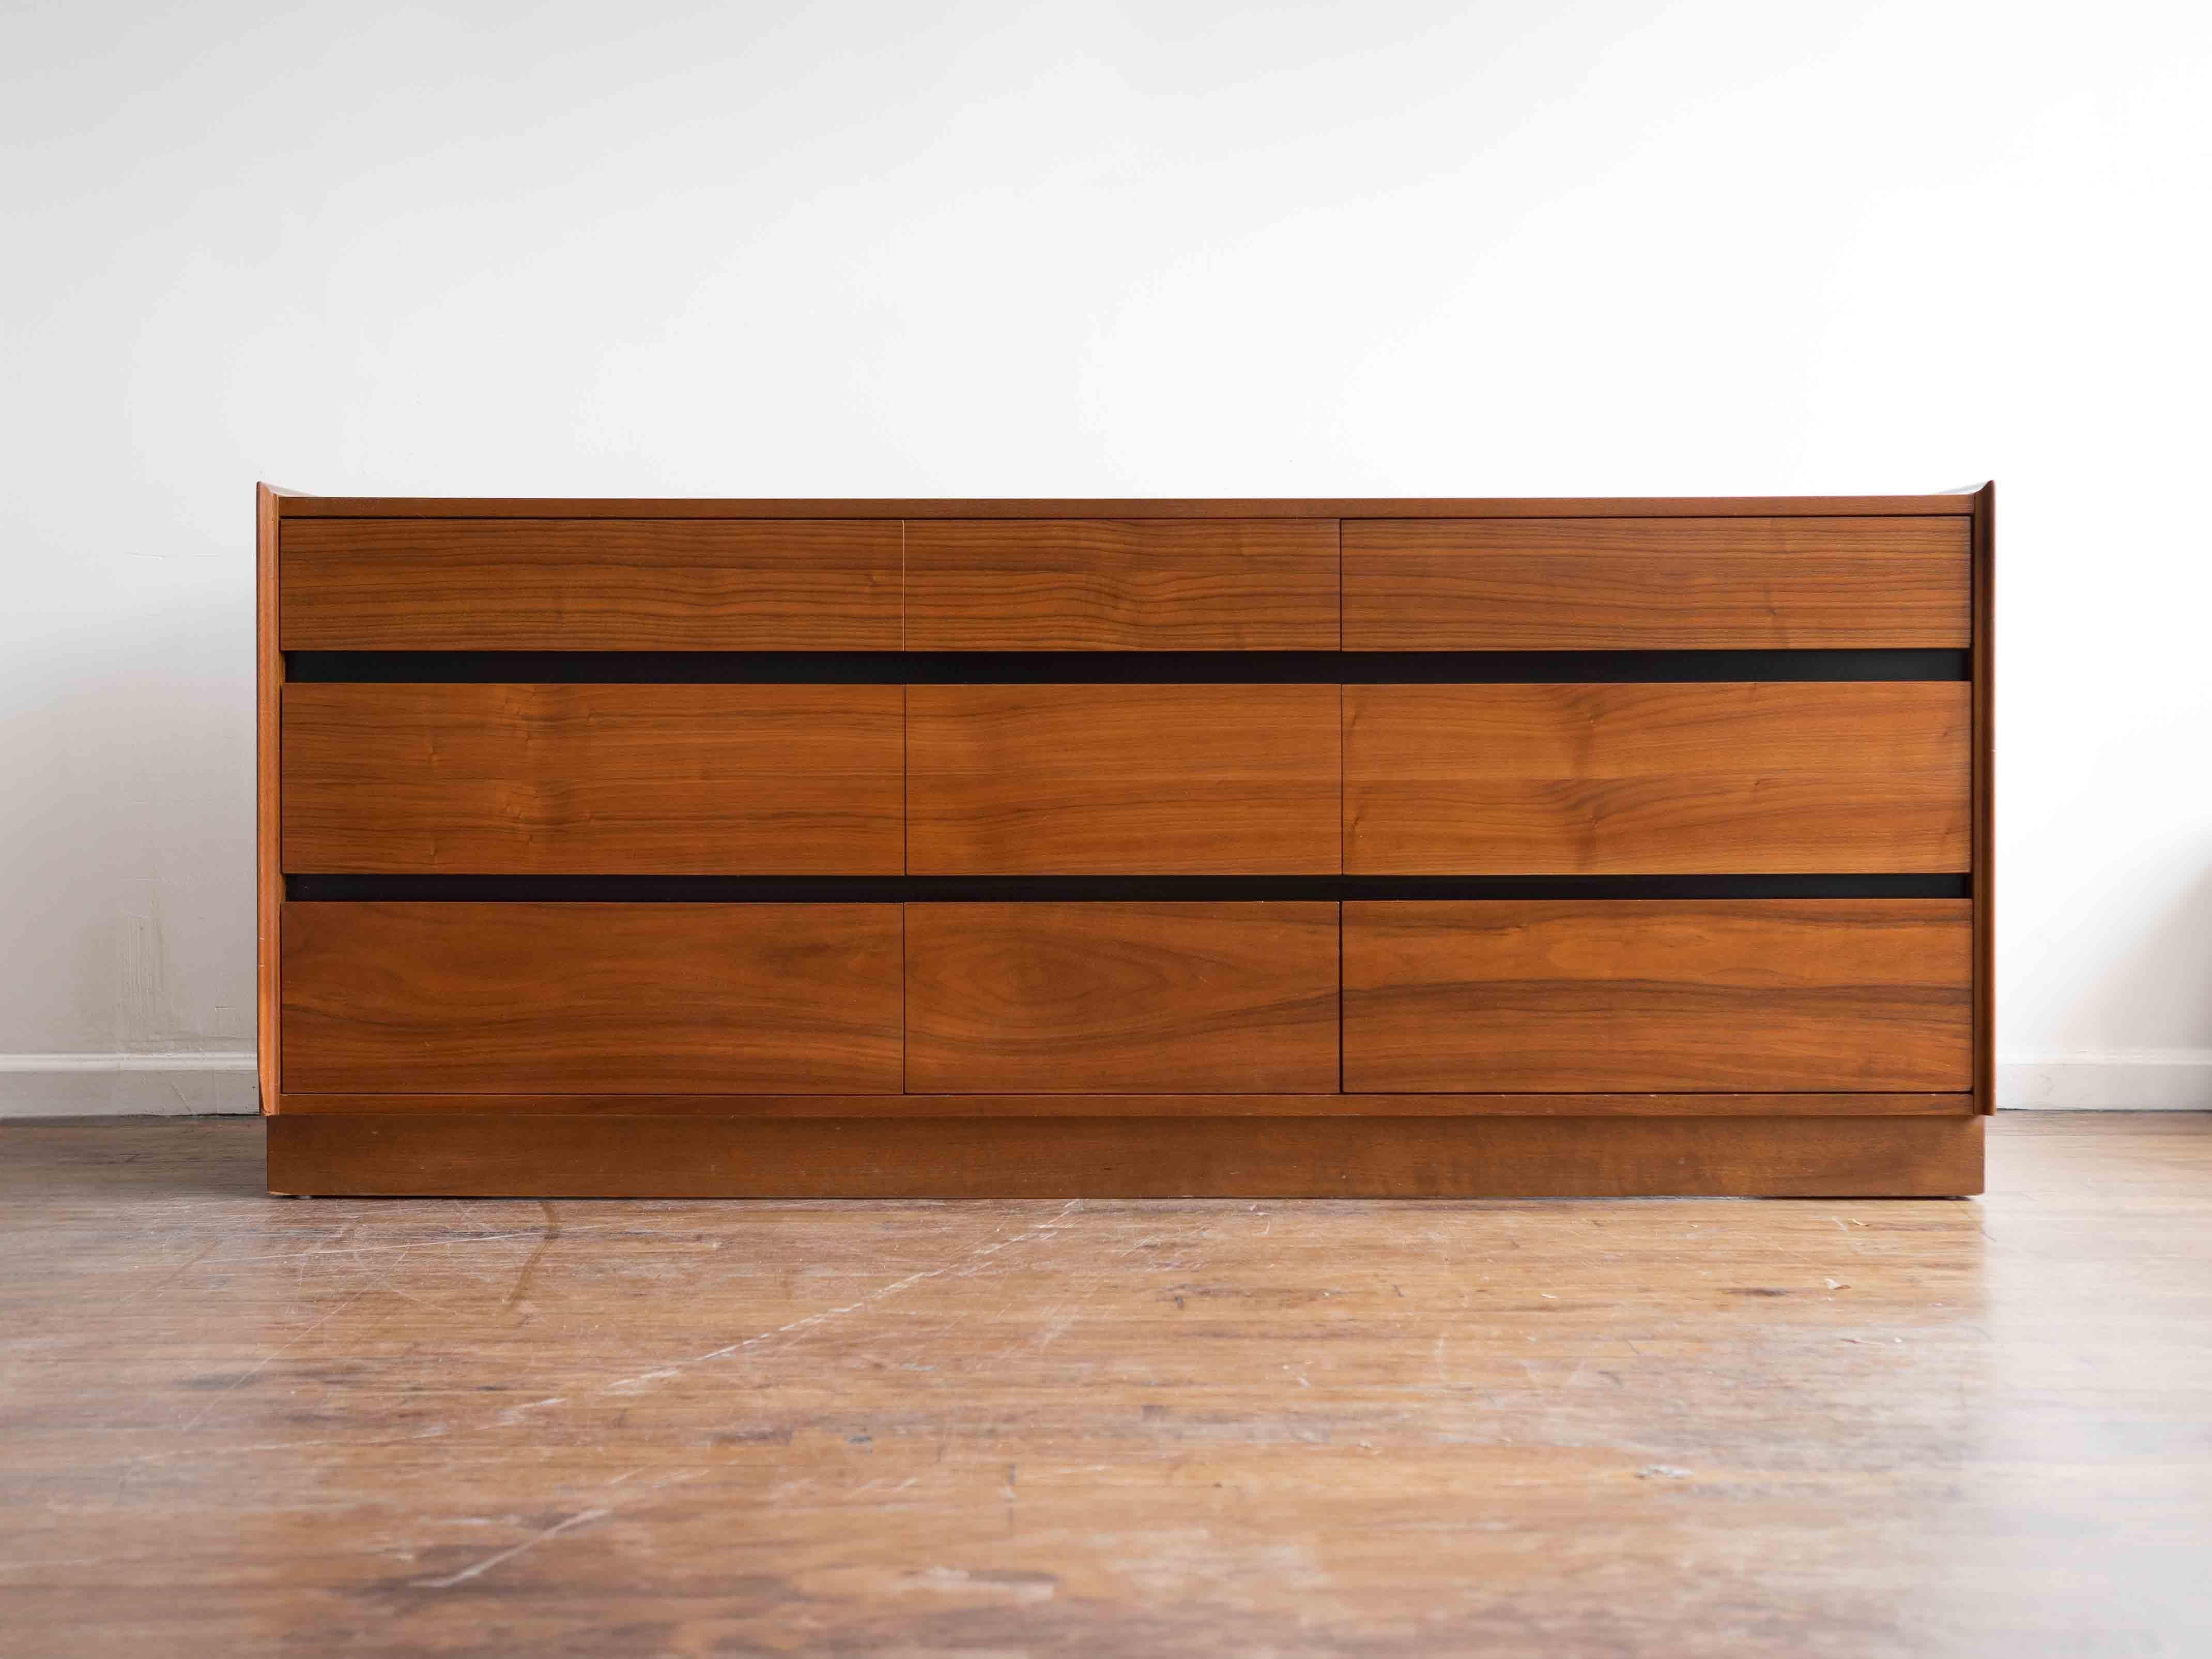 Please inquire for shipping rates. 

72” x 19” x 30”H

Classing 9 drawer lowboy designed by Merton Gershun for Dillingham's Esprit line. Walnut body and drawers with figured grain running continuously across the drawer fronts; black lacquered